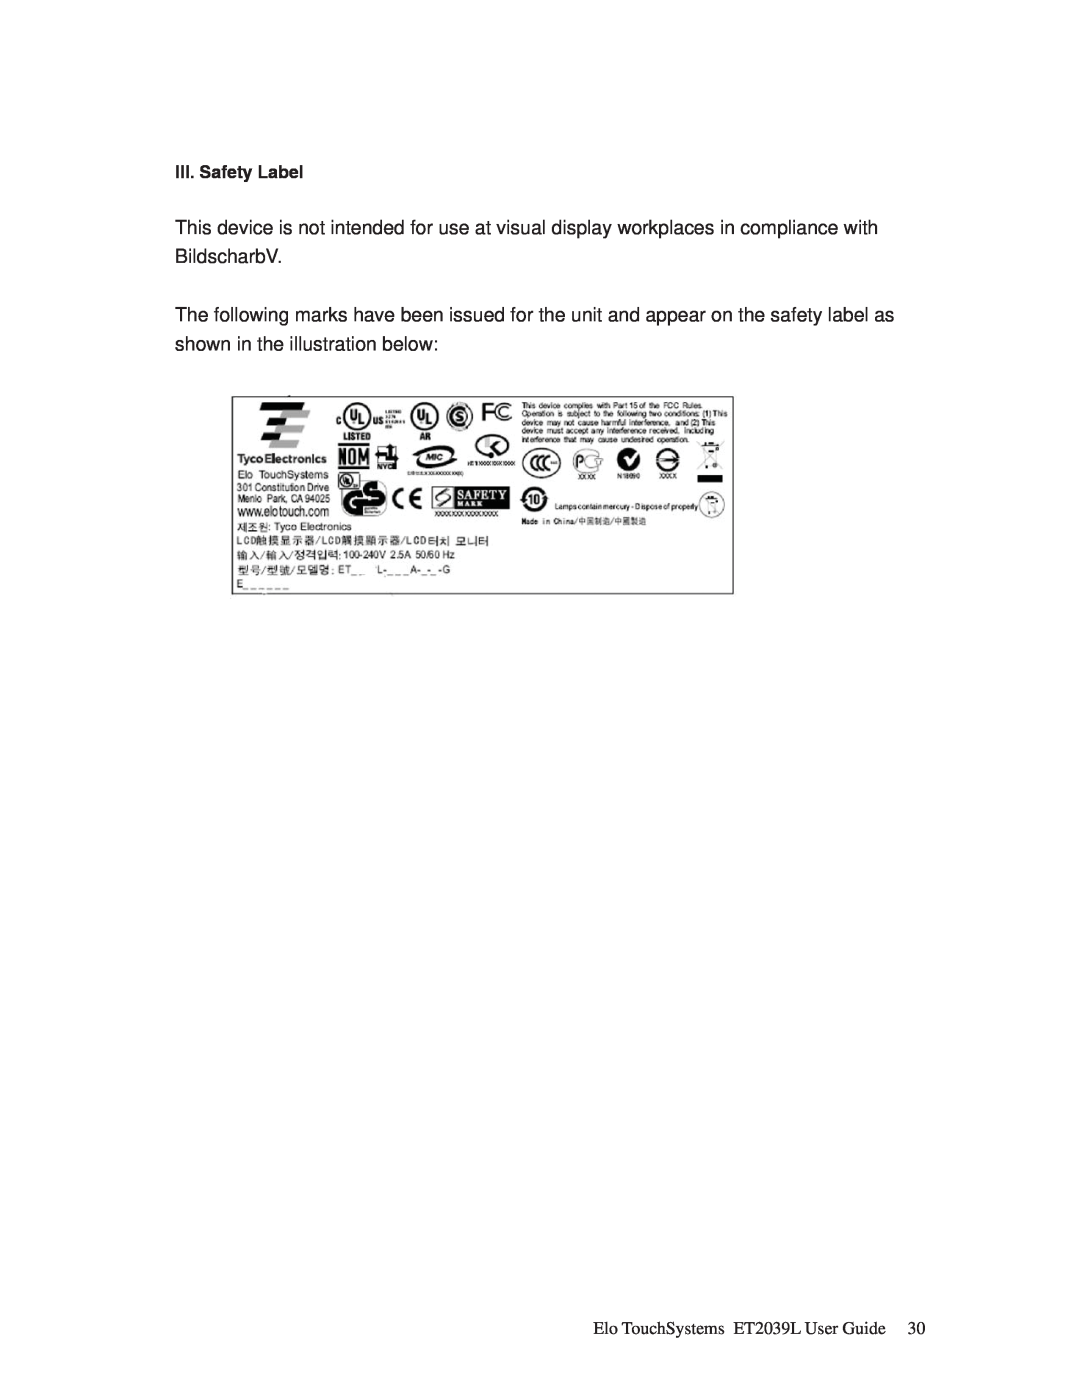 Elo TouchSystems ET2039L manual III. Safety Label 